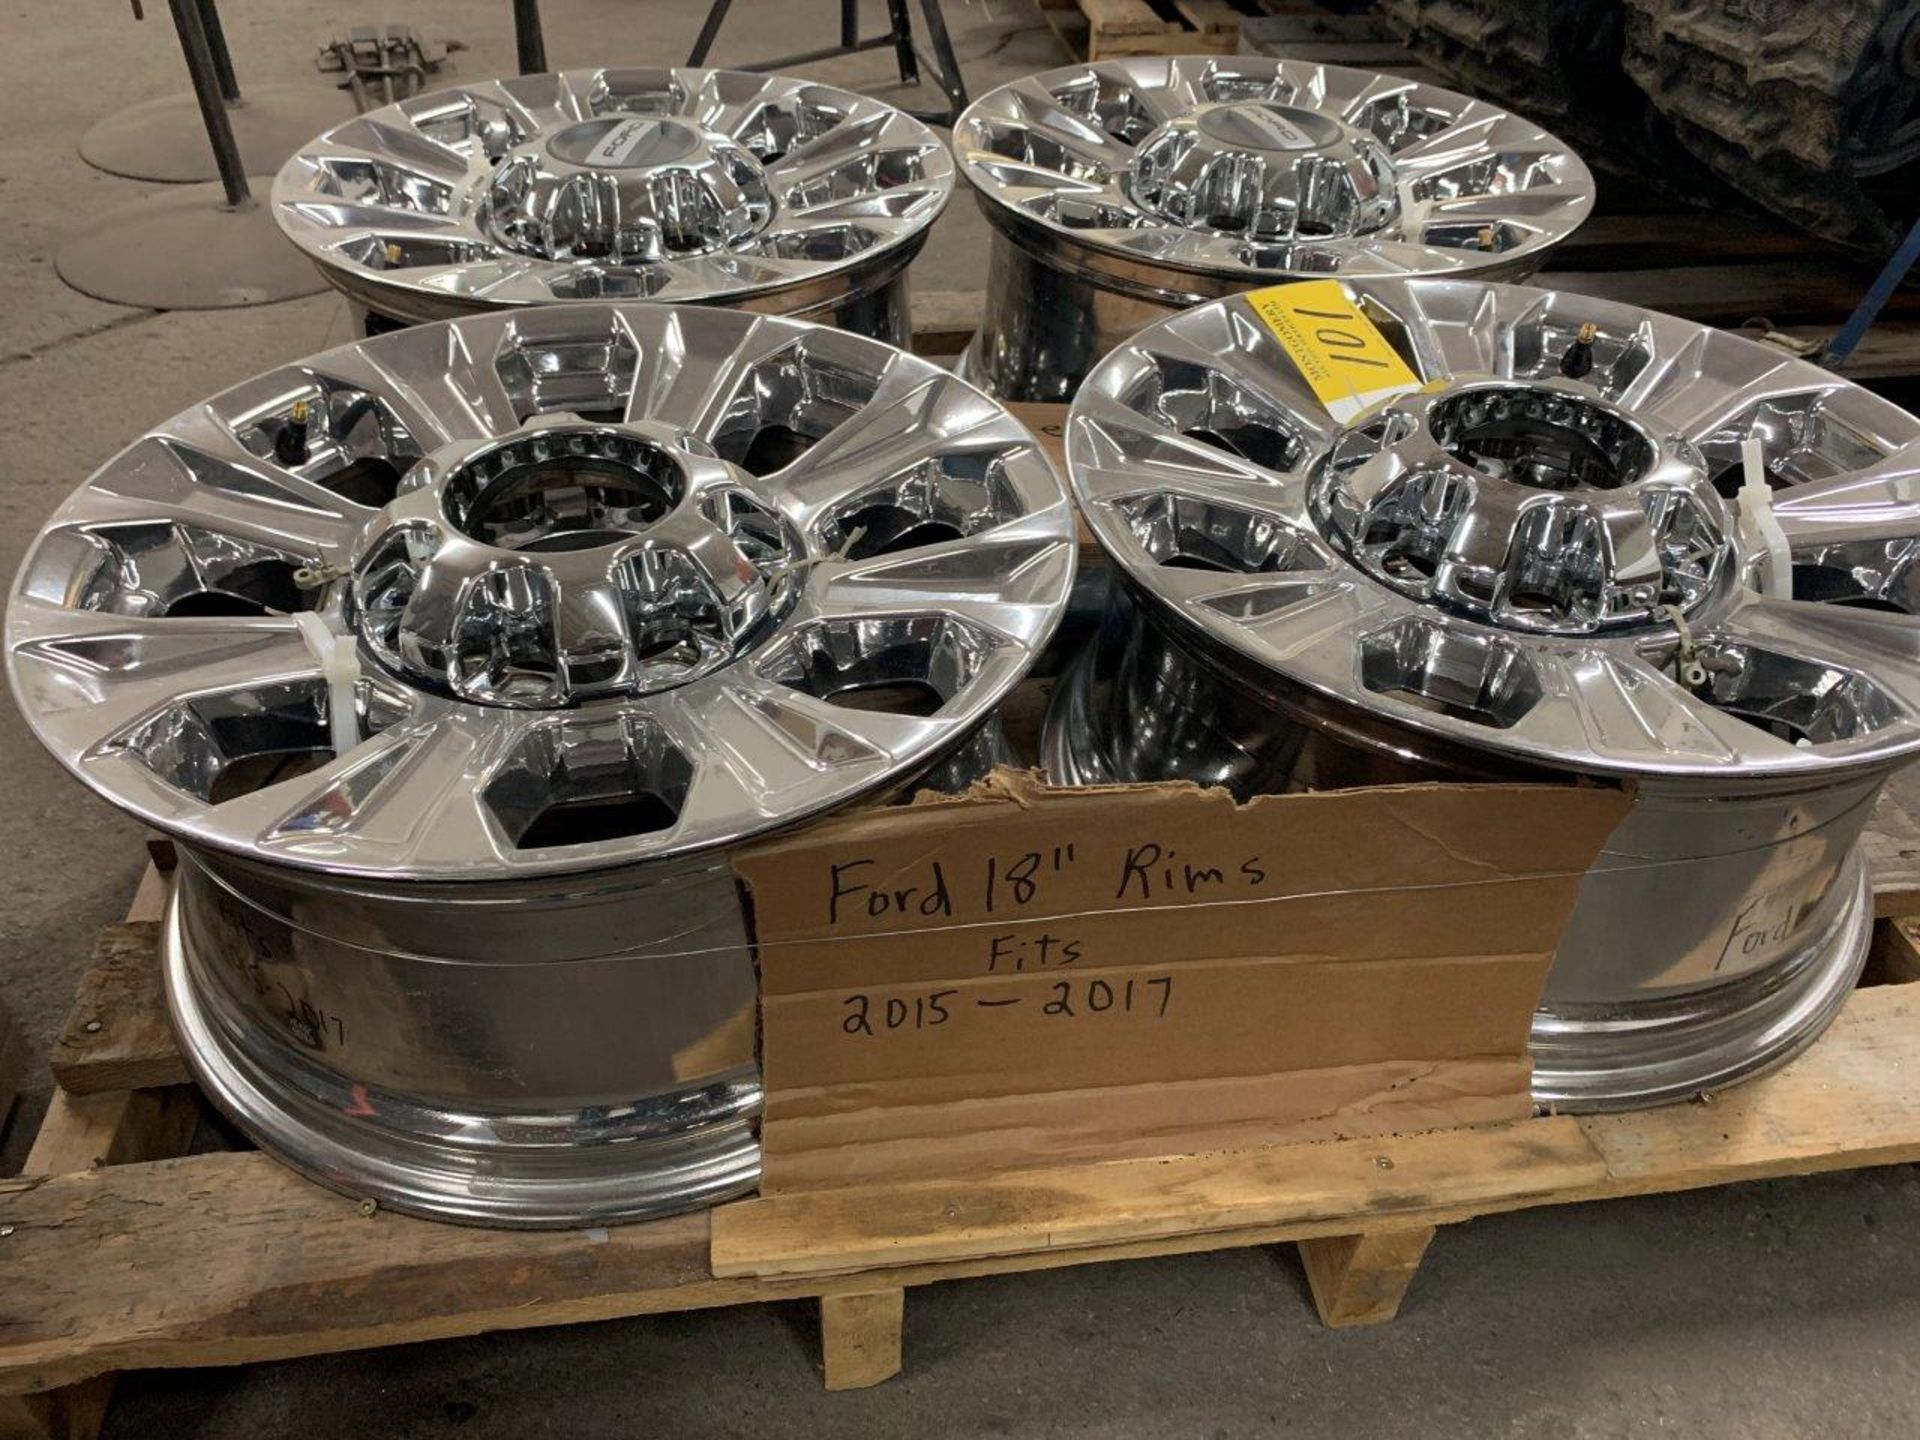 SET OF FORD 8-BOLT CHROME RIMS - 18 IN RIMS, FITS 2015-2017 - Image 3 of 3